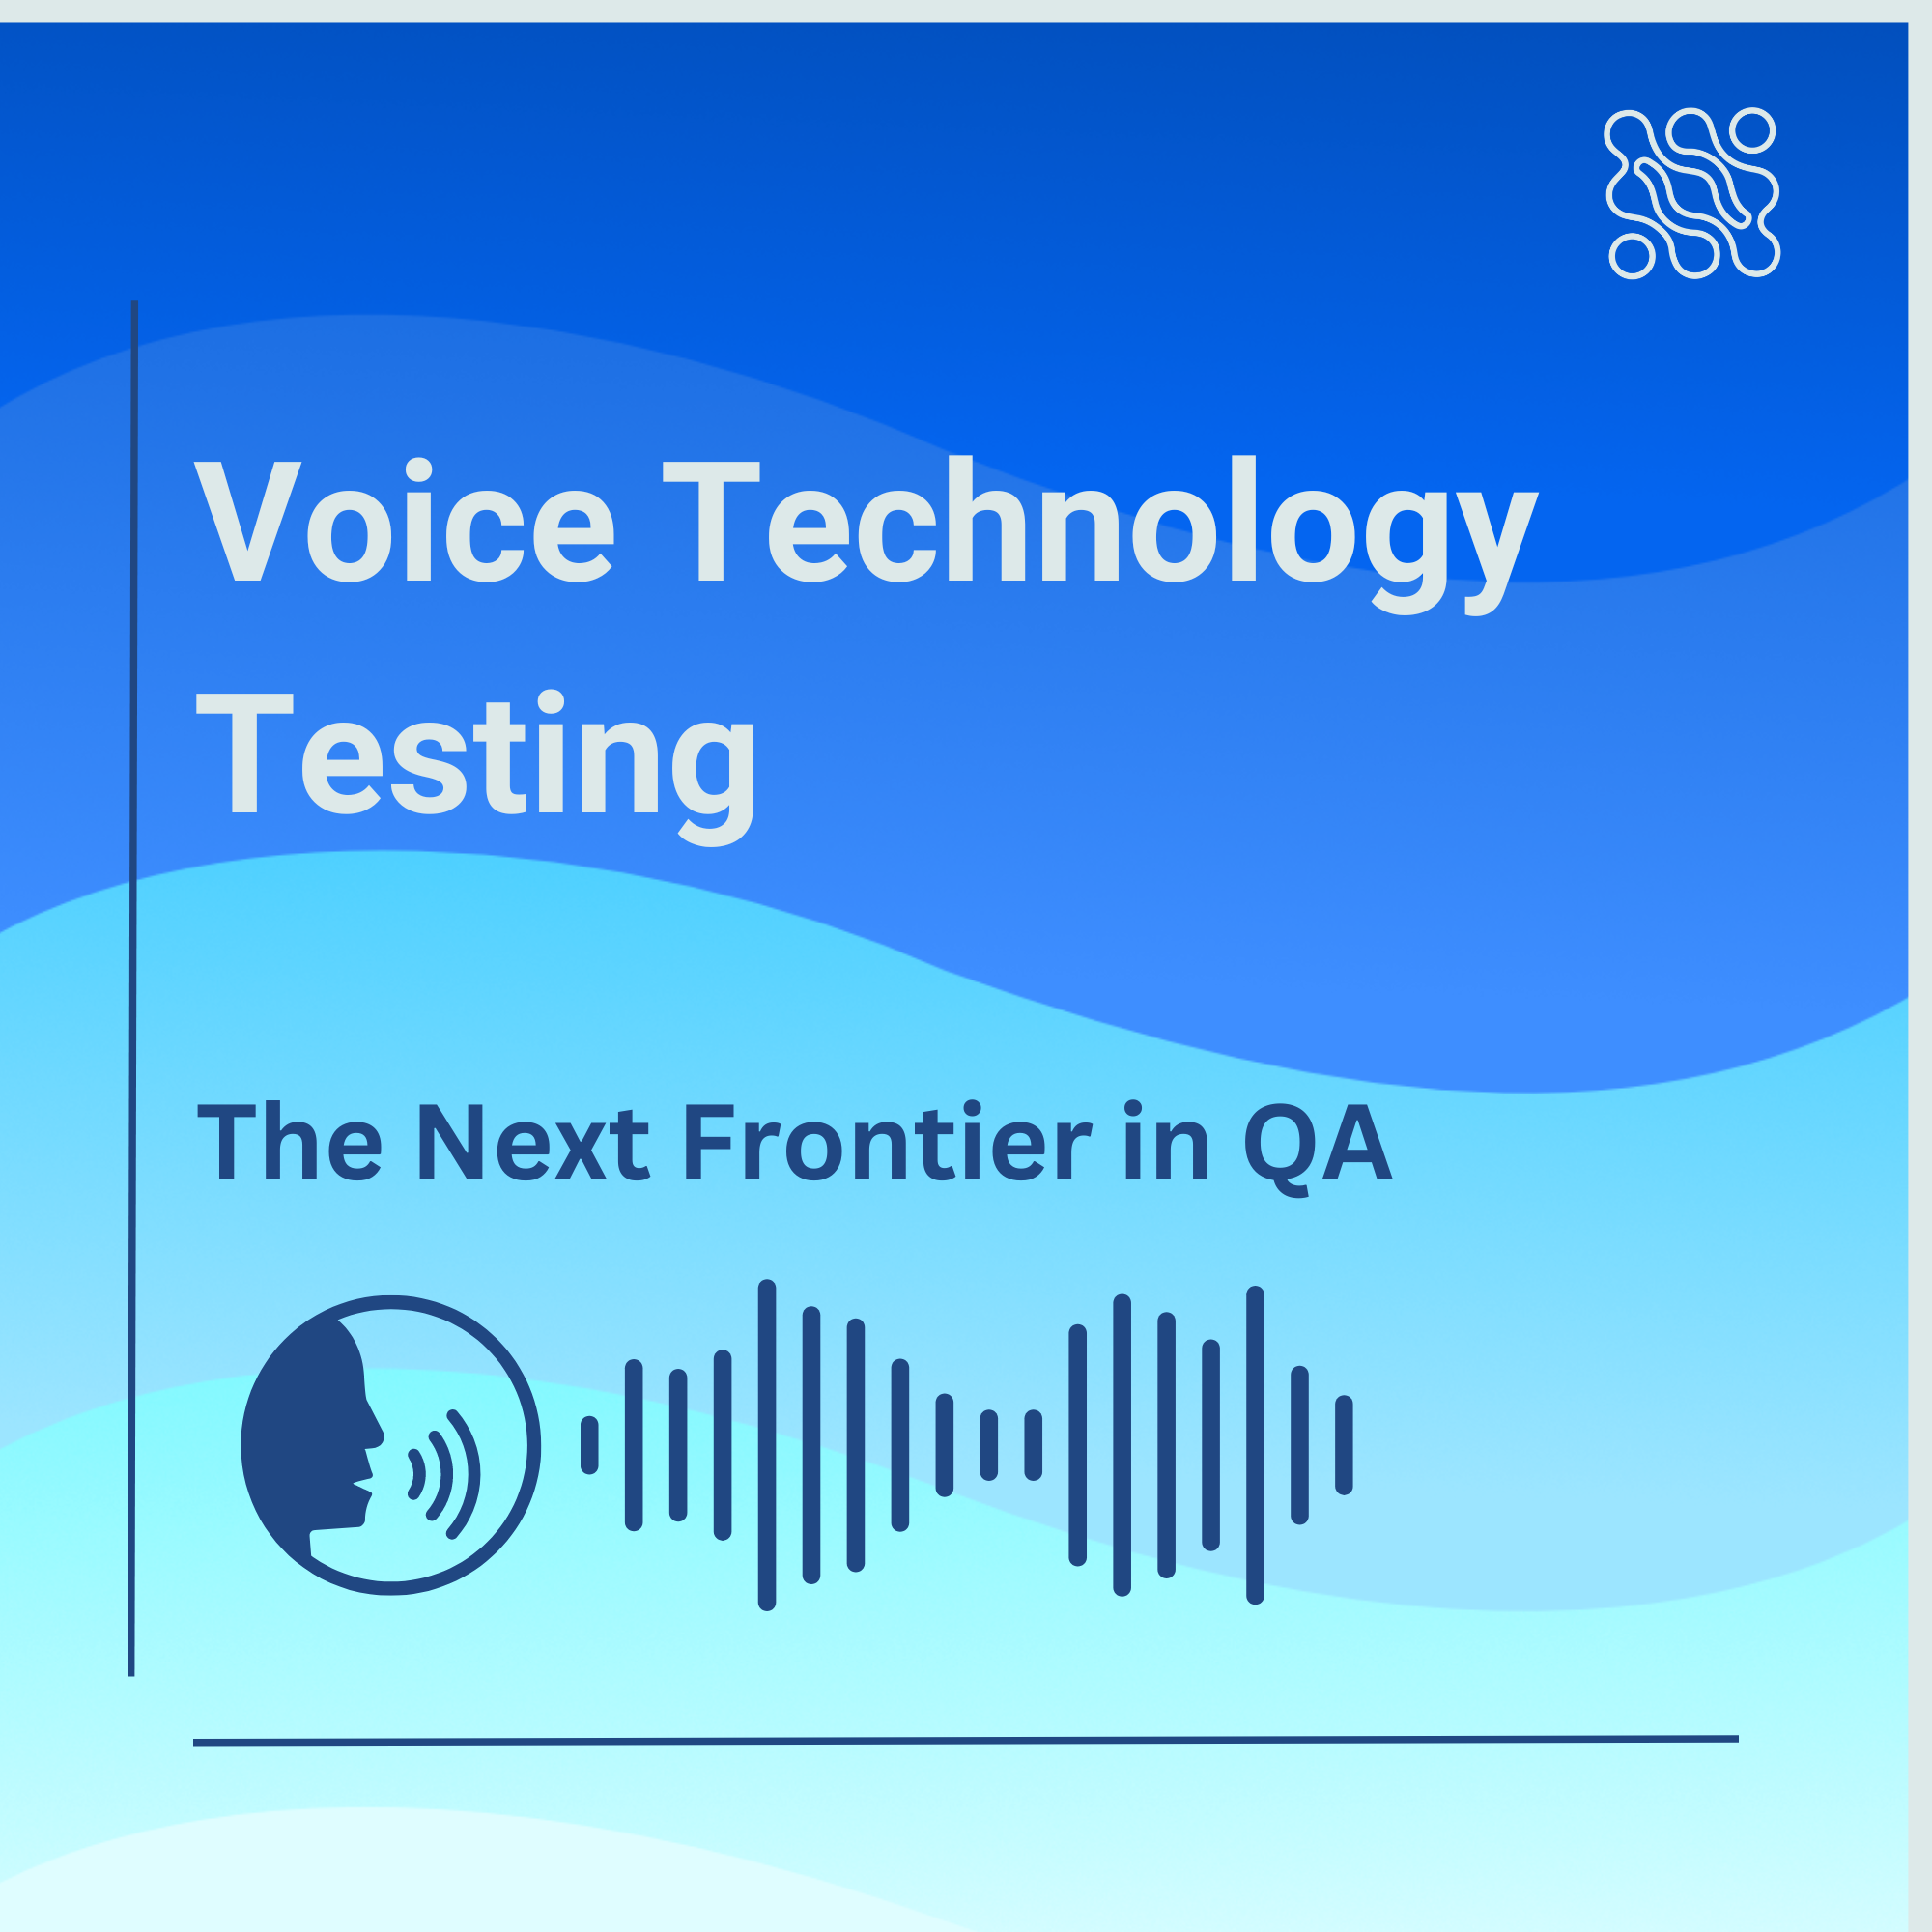 Voice Technology Testing The Next Frontier in QA